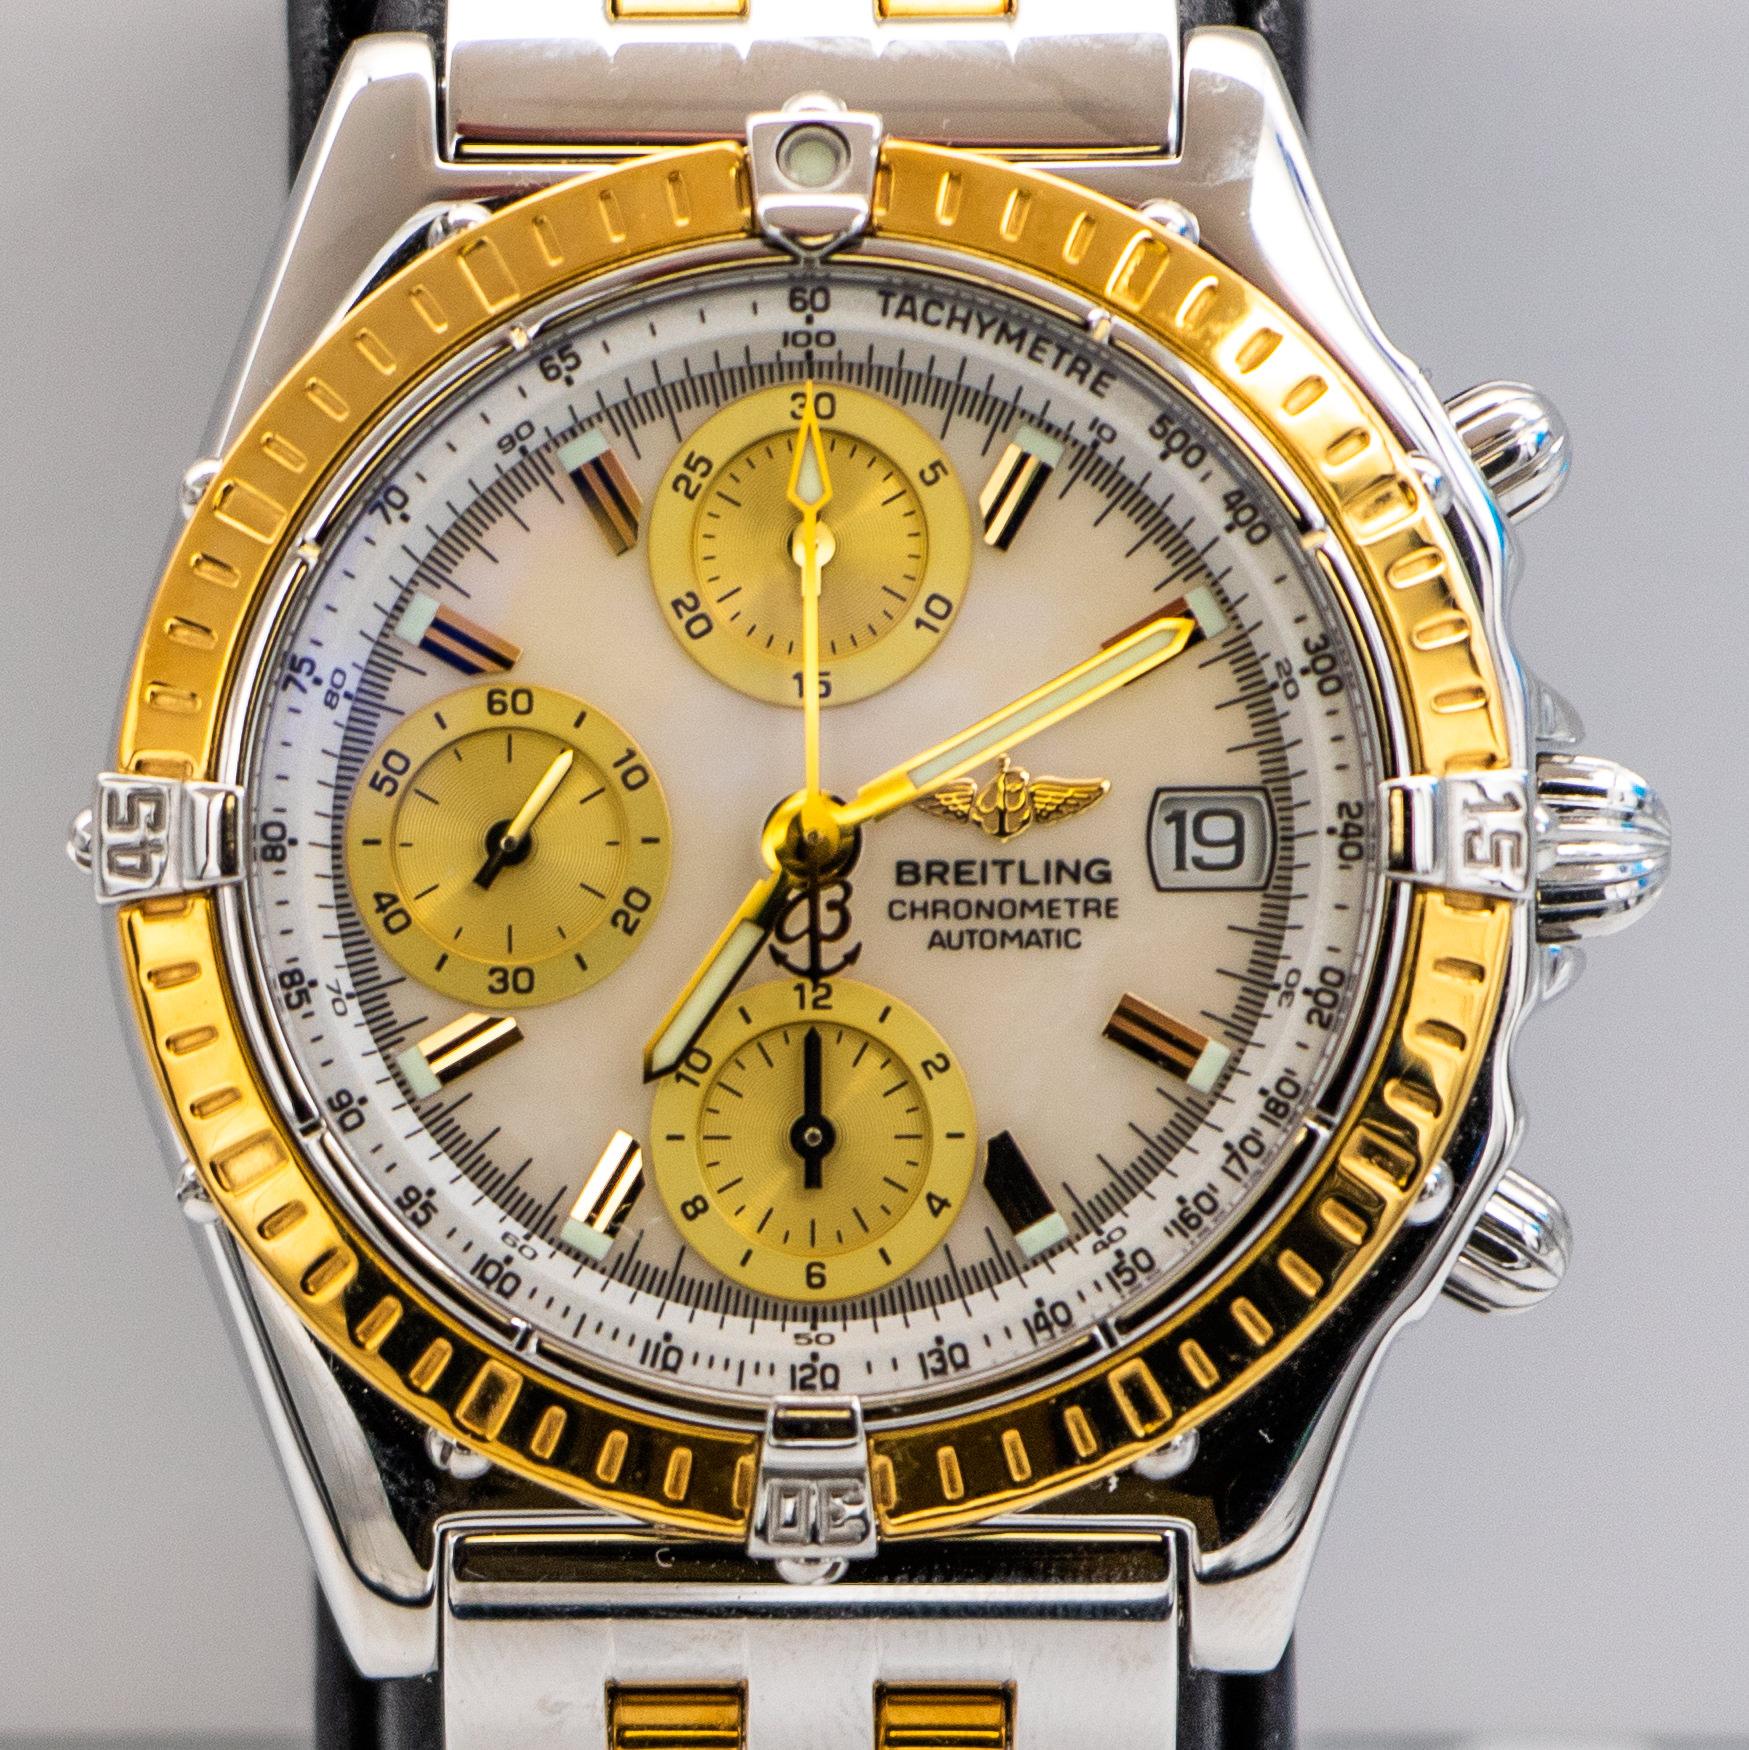 Brand: Breitling
Movement: Automatic Self-Winding Chronometer Movement
Case Diameter: 40mm, Stainless Steel And 18K Yellow Gold
Dial: Mother Of Pearl, Three Chronograph Sub-Dials - 60 Seconds, 30 Minutes, 12 Hours
Bracelet: Stainless Steel and 18K